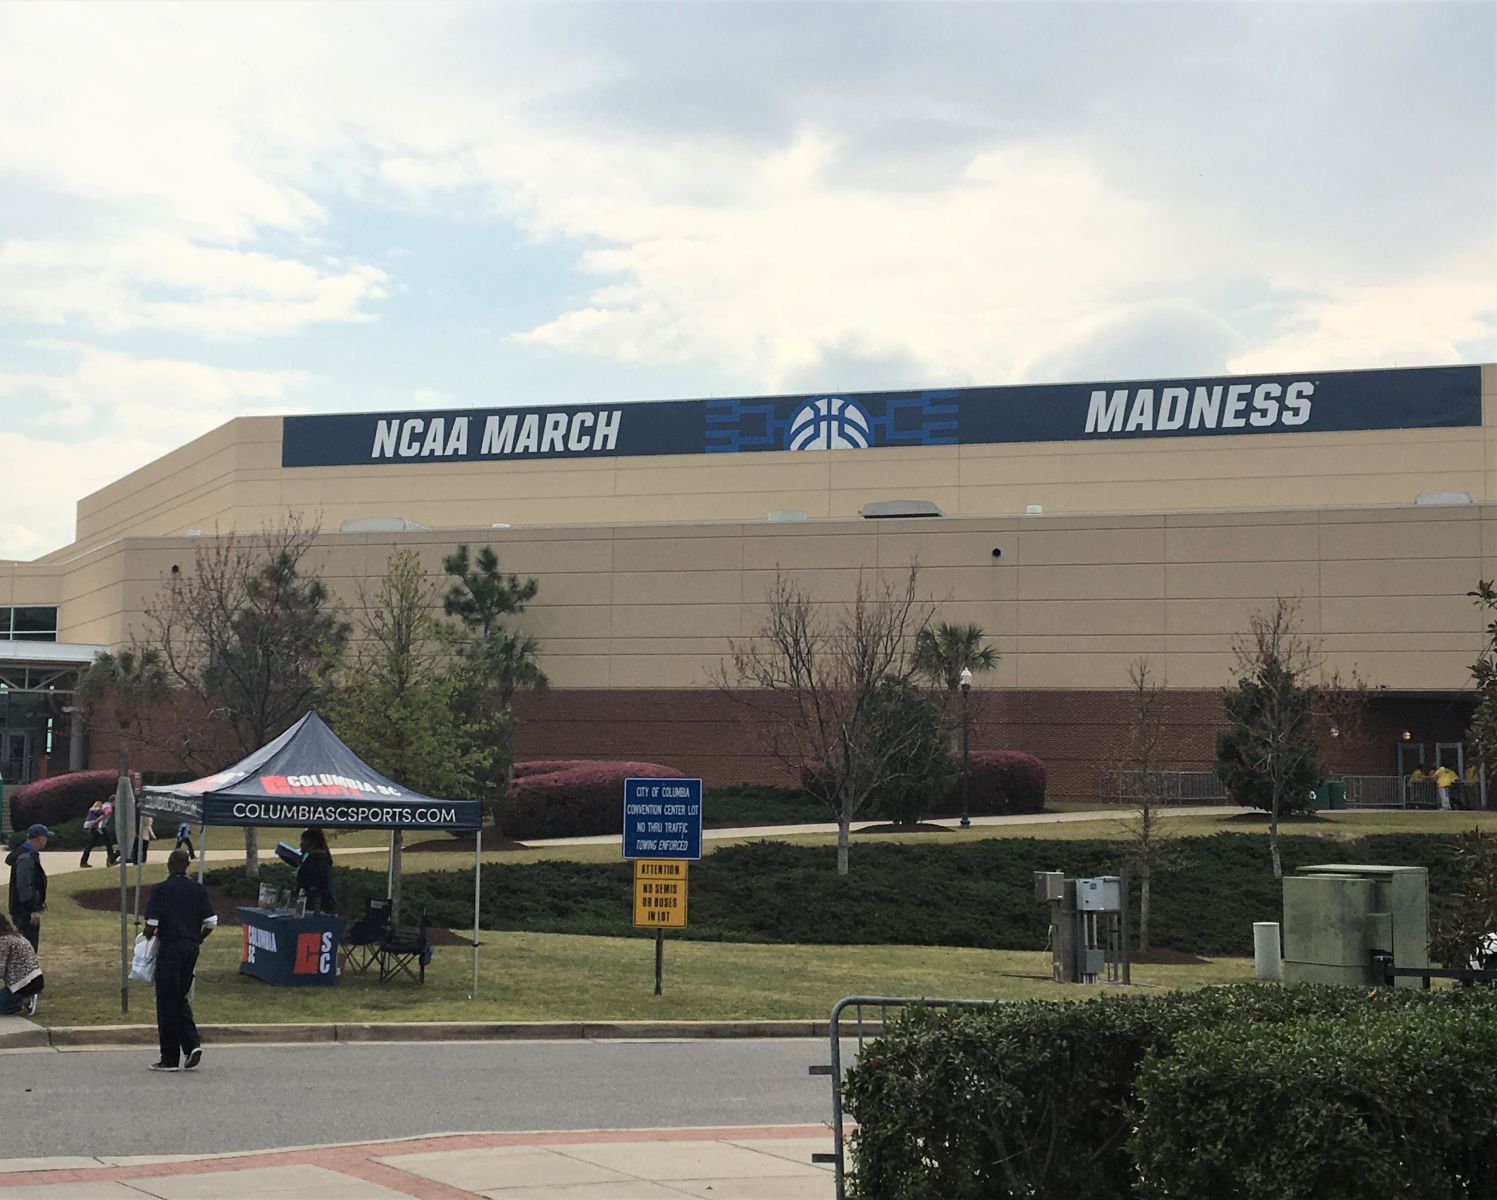 Colonial Life Arena played host to an NCAA men's regional March 22-24. A study found the event generated an economic impact of $11.3 million. (Photo/Melinda Waldrop)